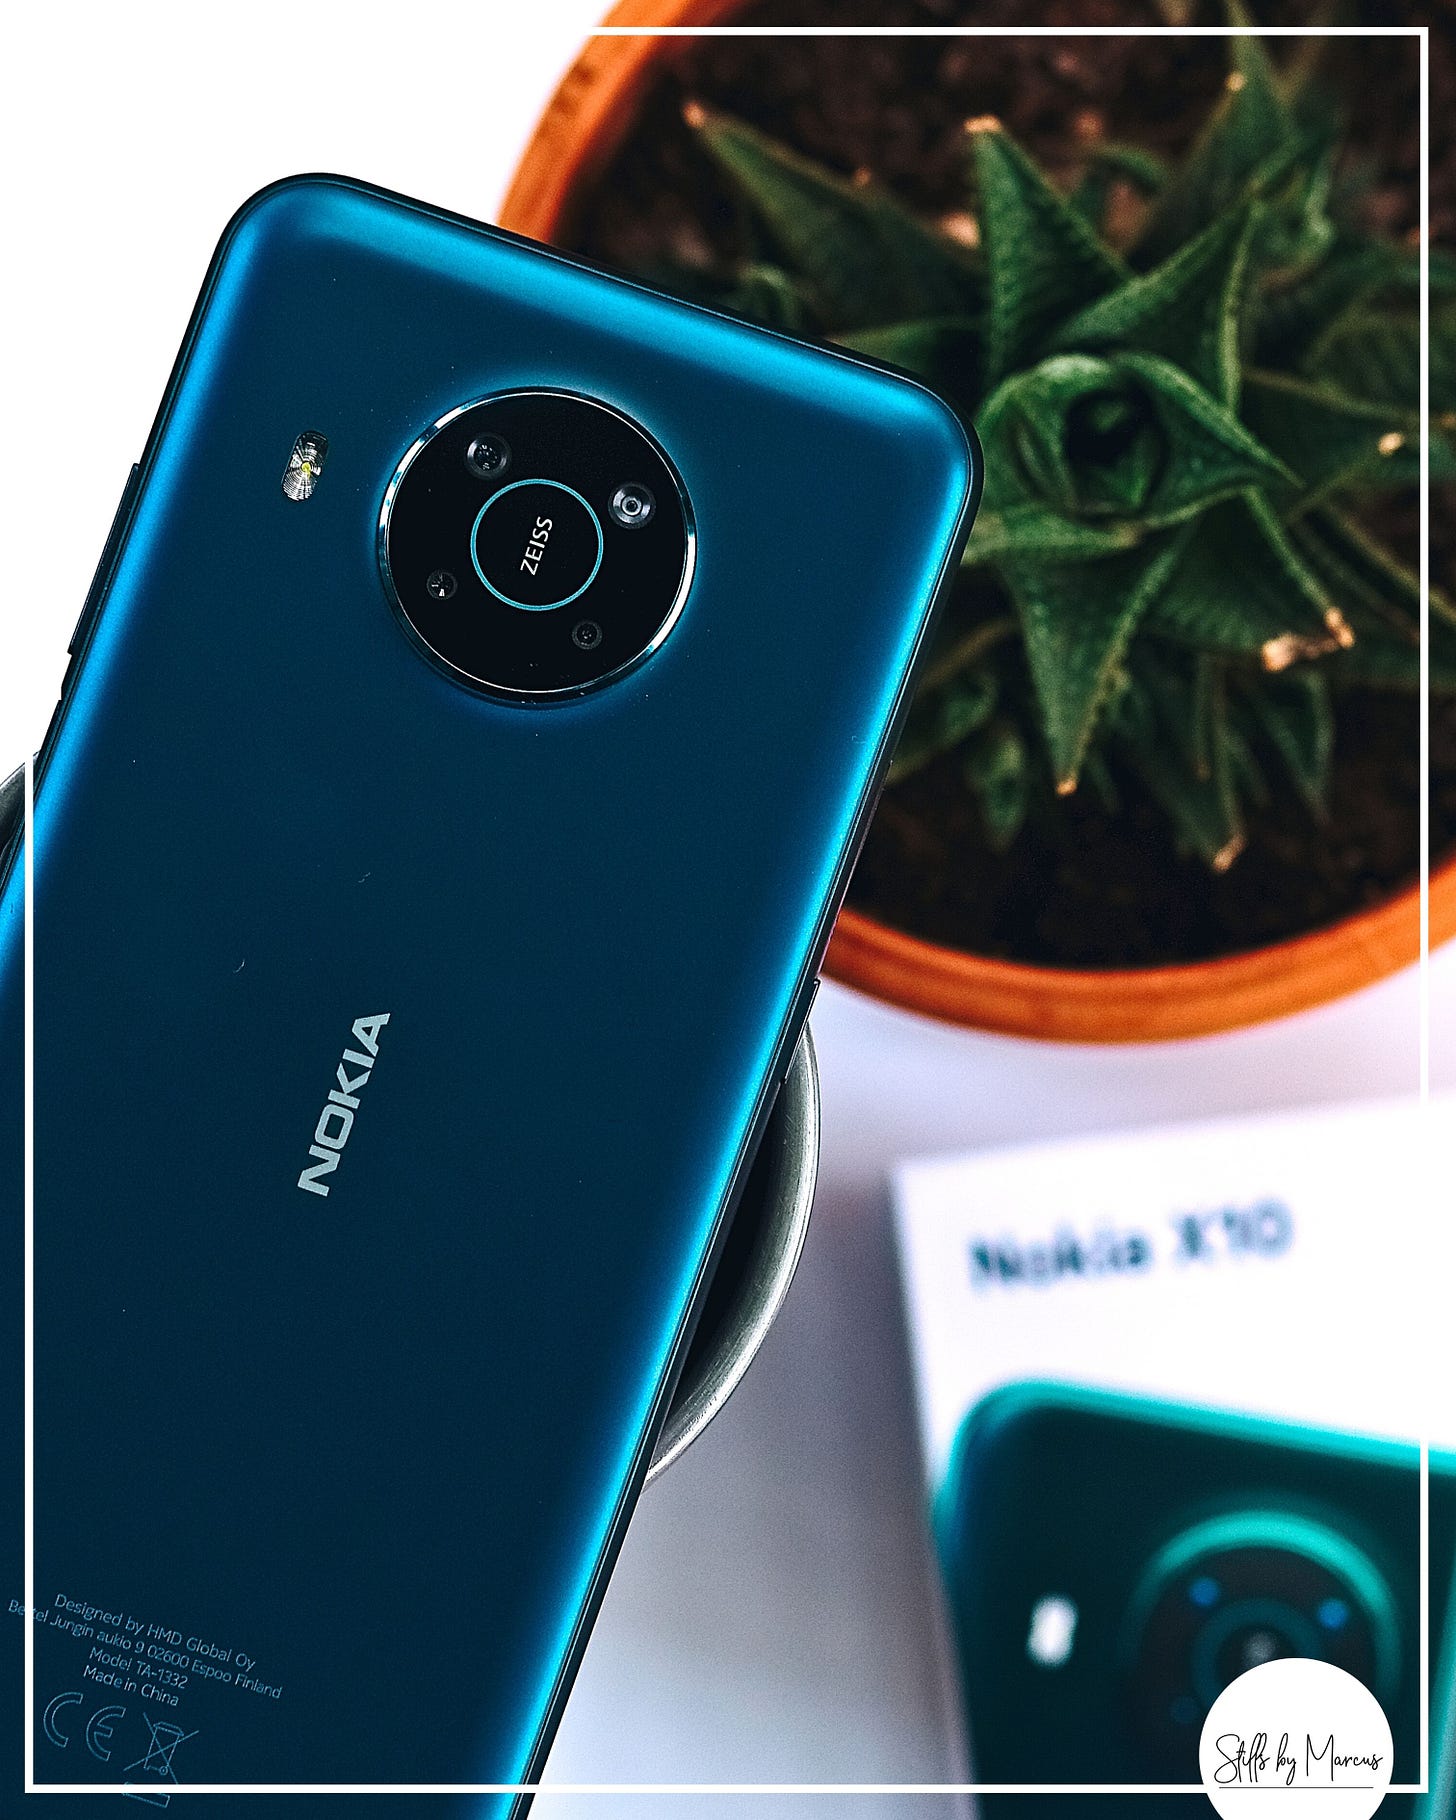 The Nokia X10. Test device provided by Nokia Mobile. Photo by Marcus Olang’ (Stills by Marcus).